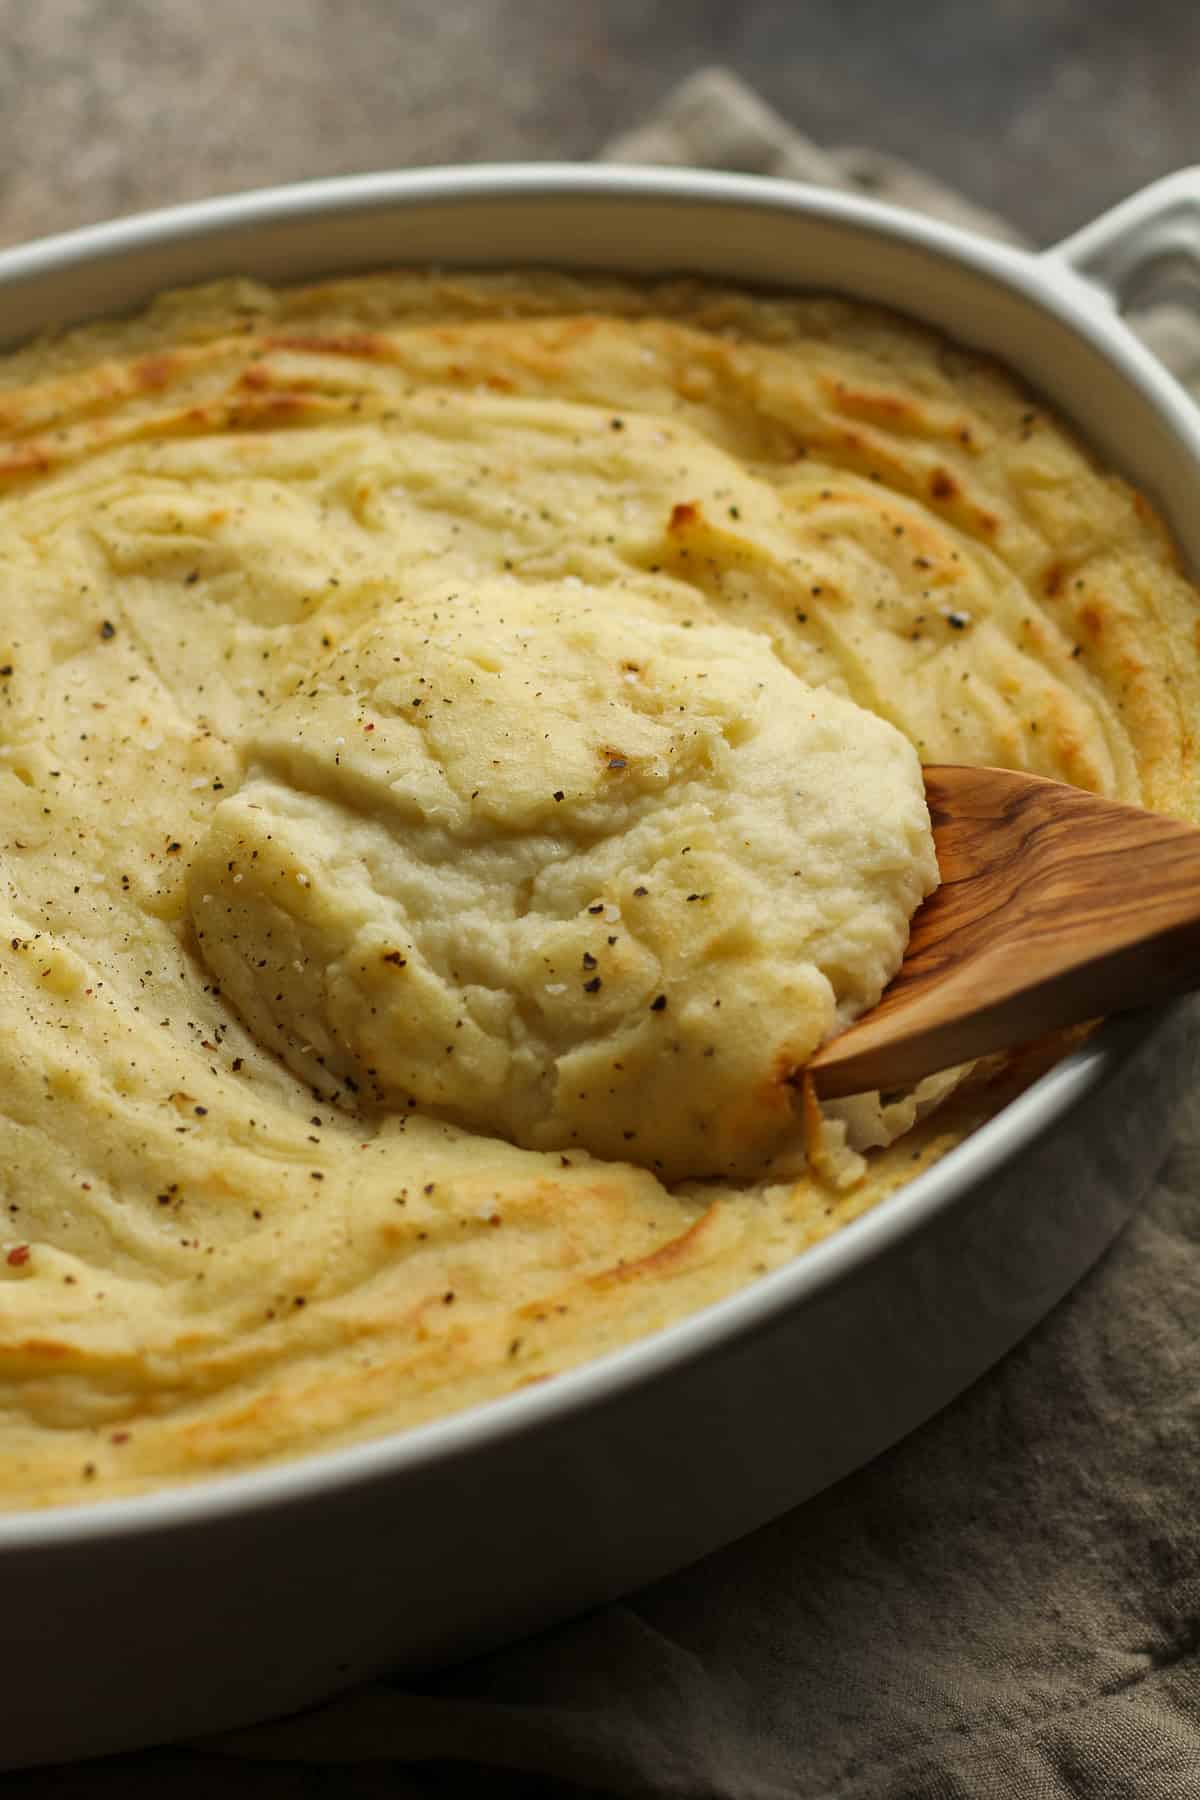 Side view of a scoop of creamy mashed potatoes over a casserole dish.